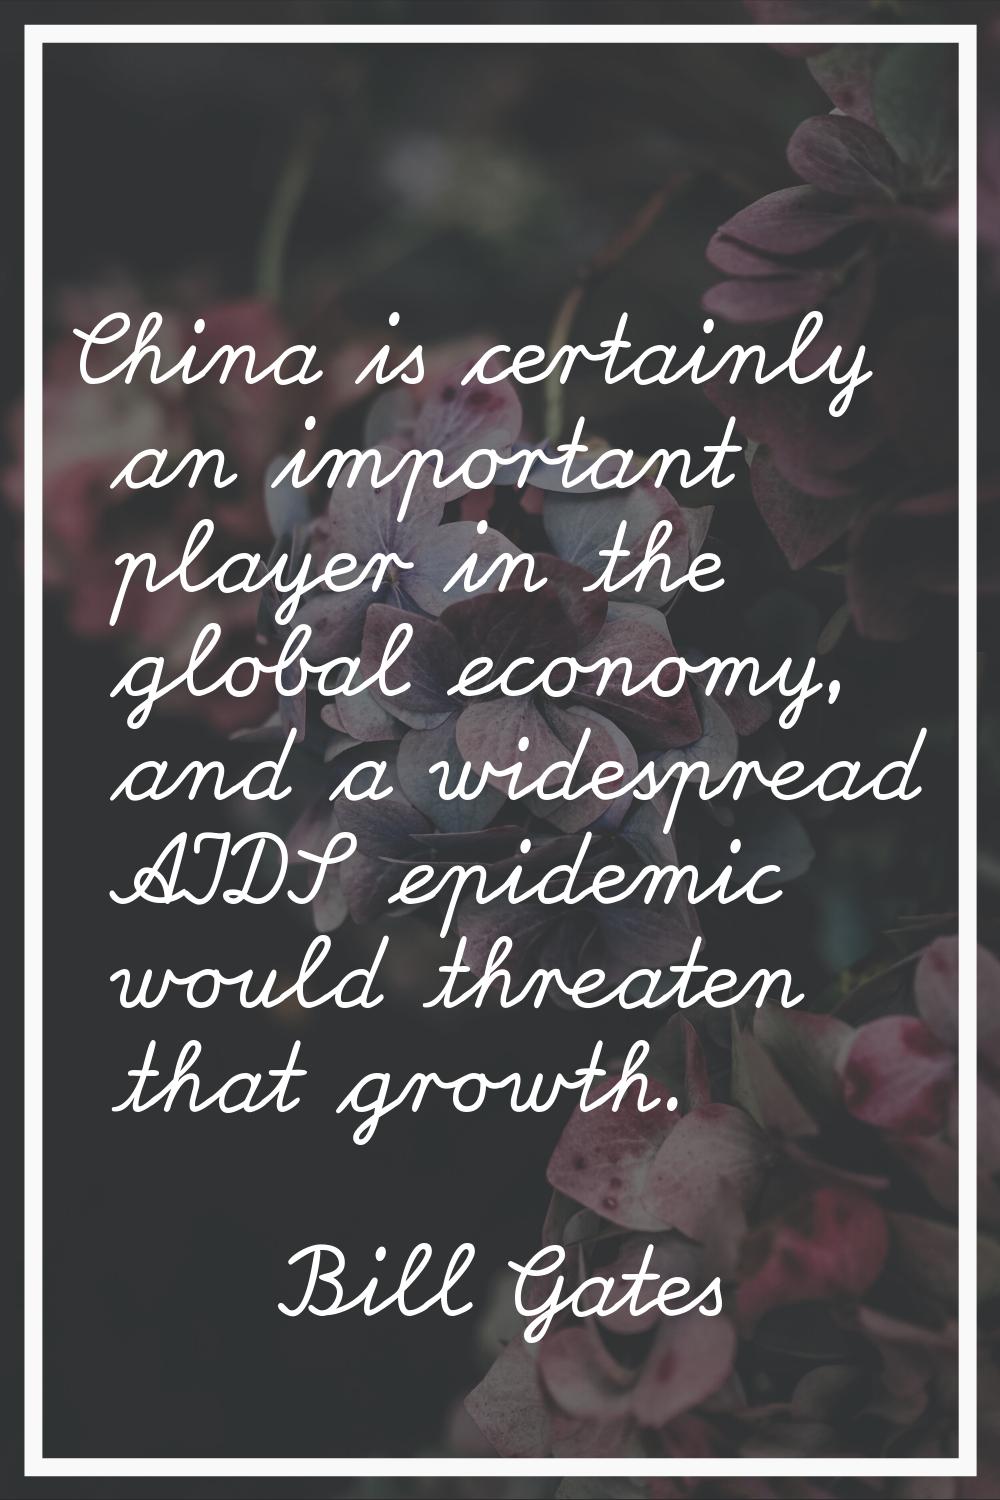 China is certainly an important player in the global economy, and a widespread AIDS epidemic would 